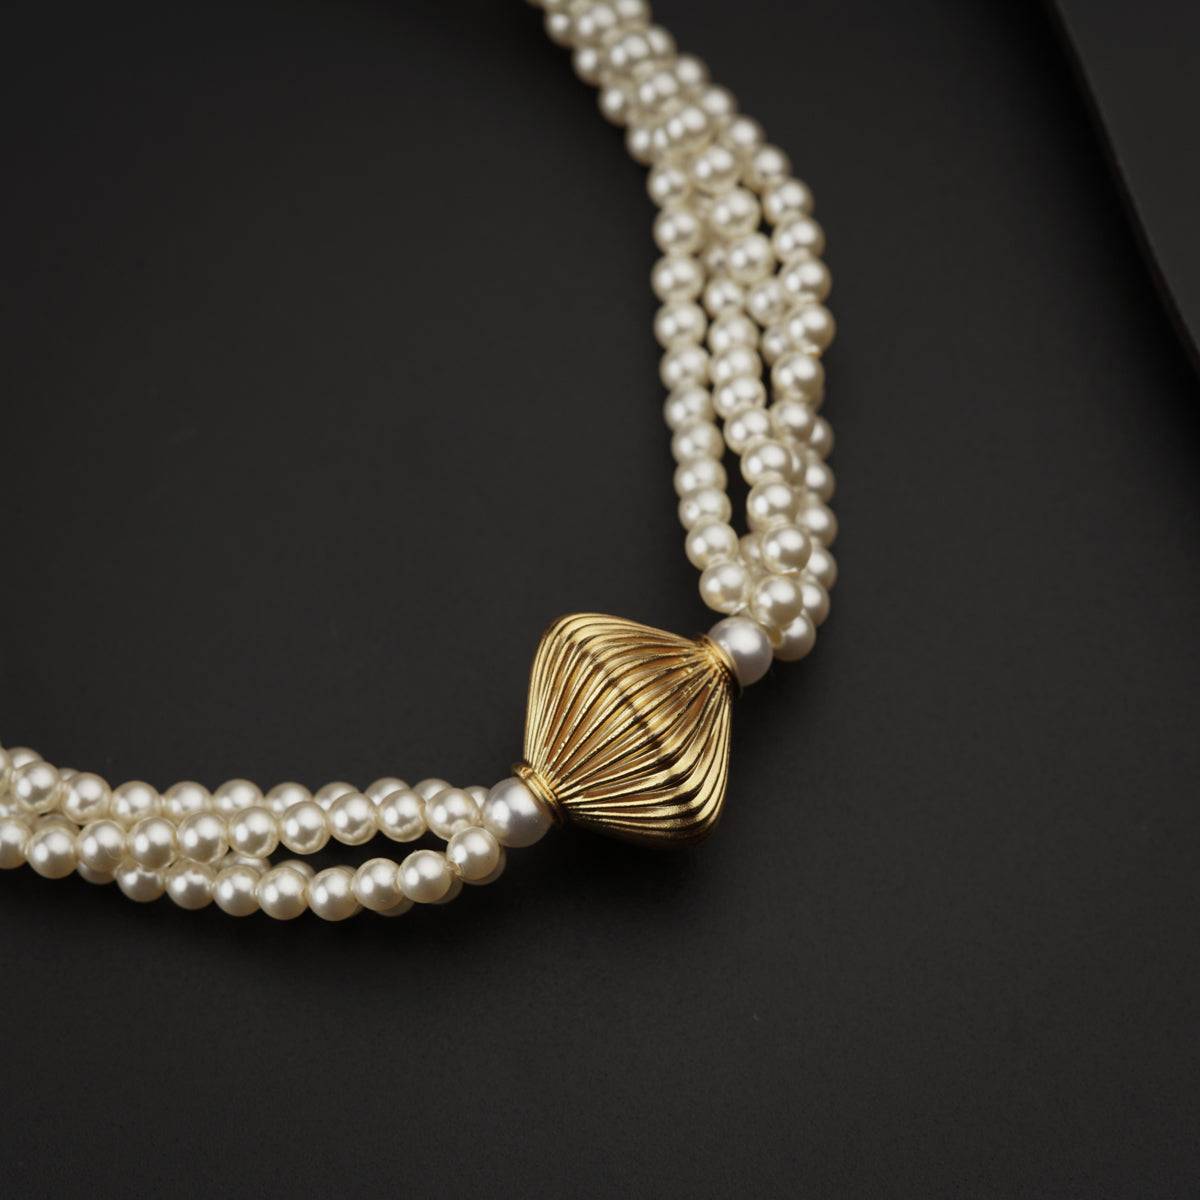 Jevmani Motif Necklace with Pearls Gold Plated